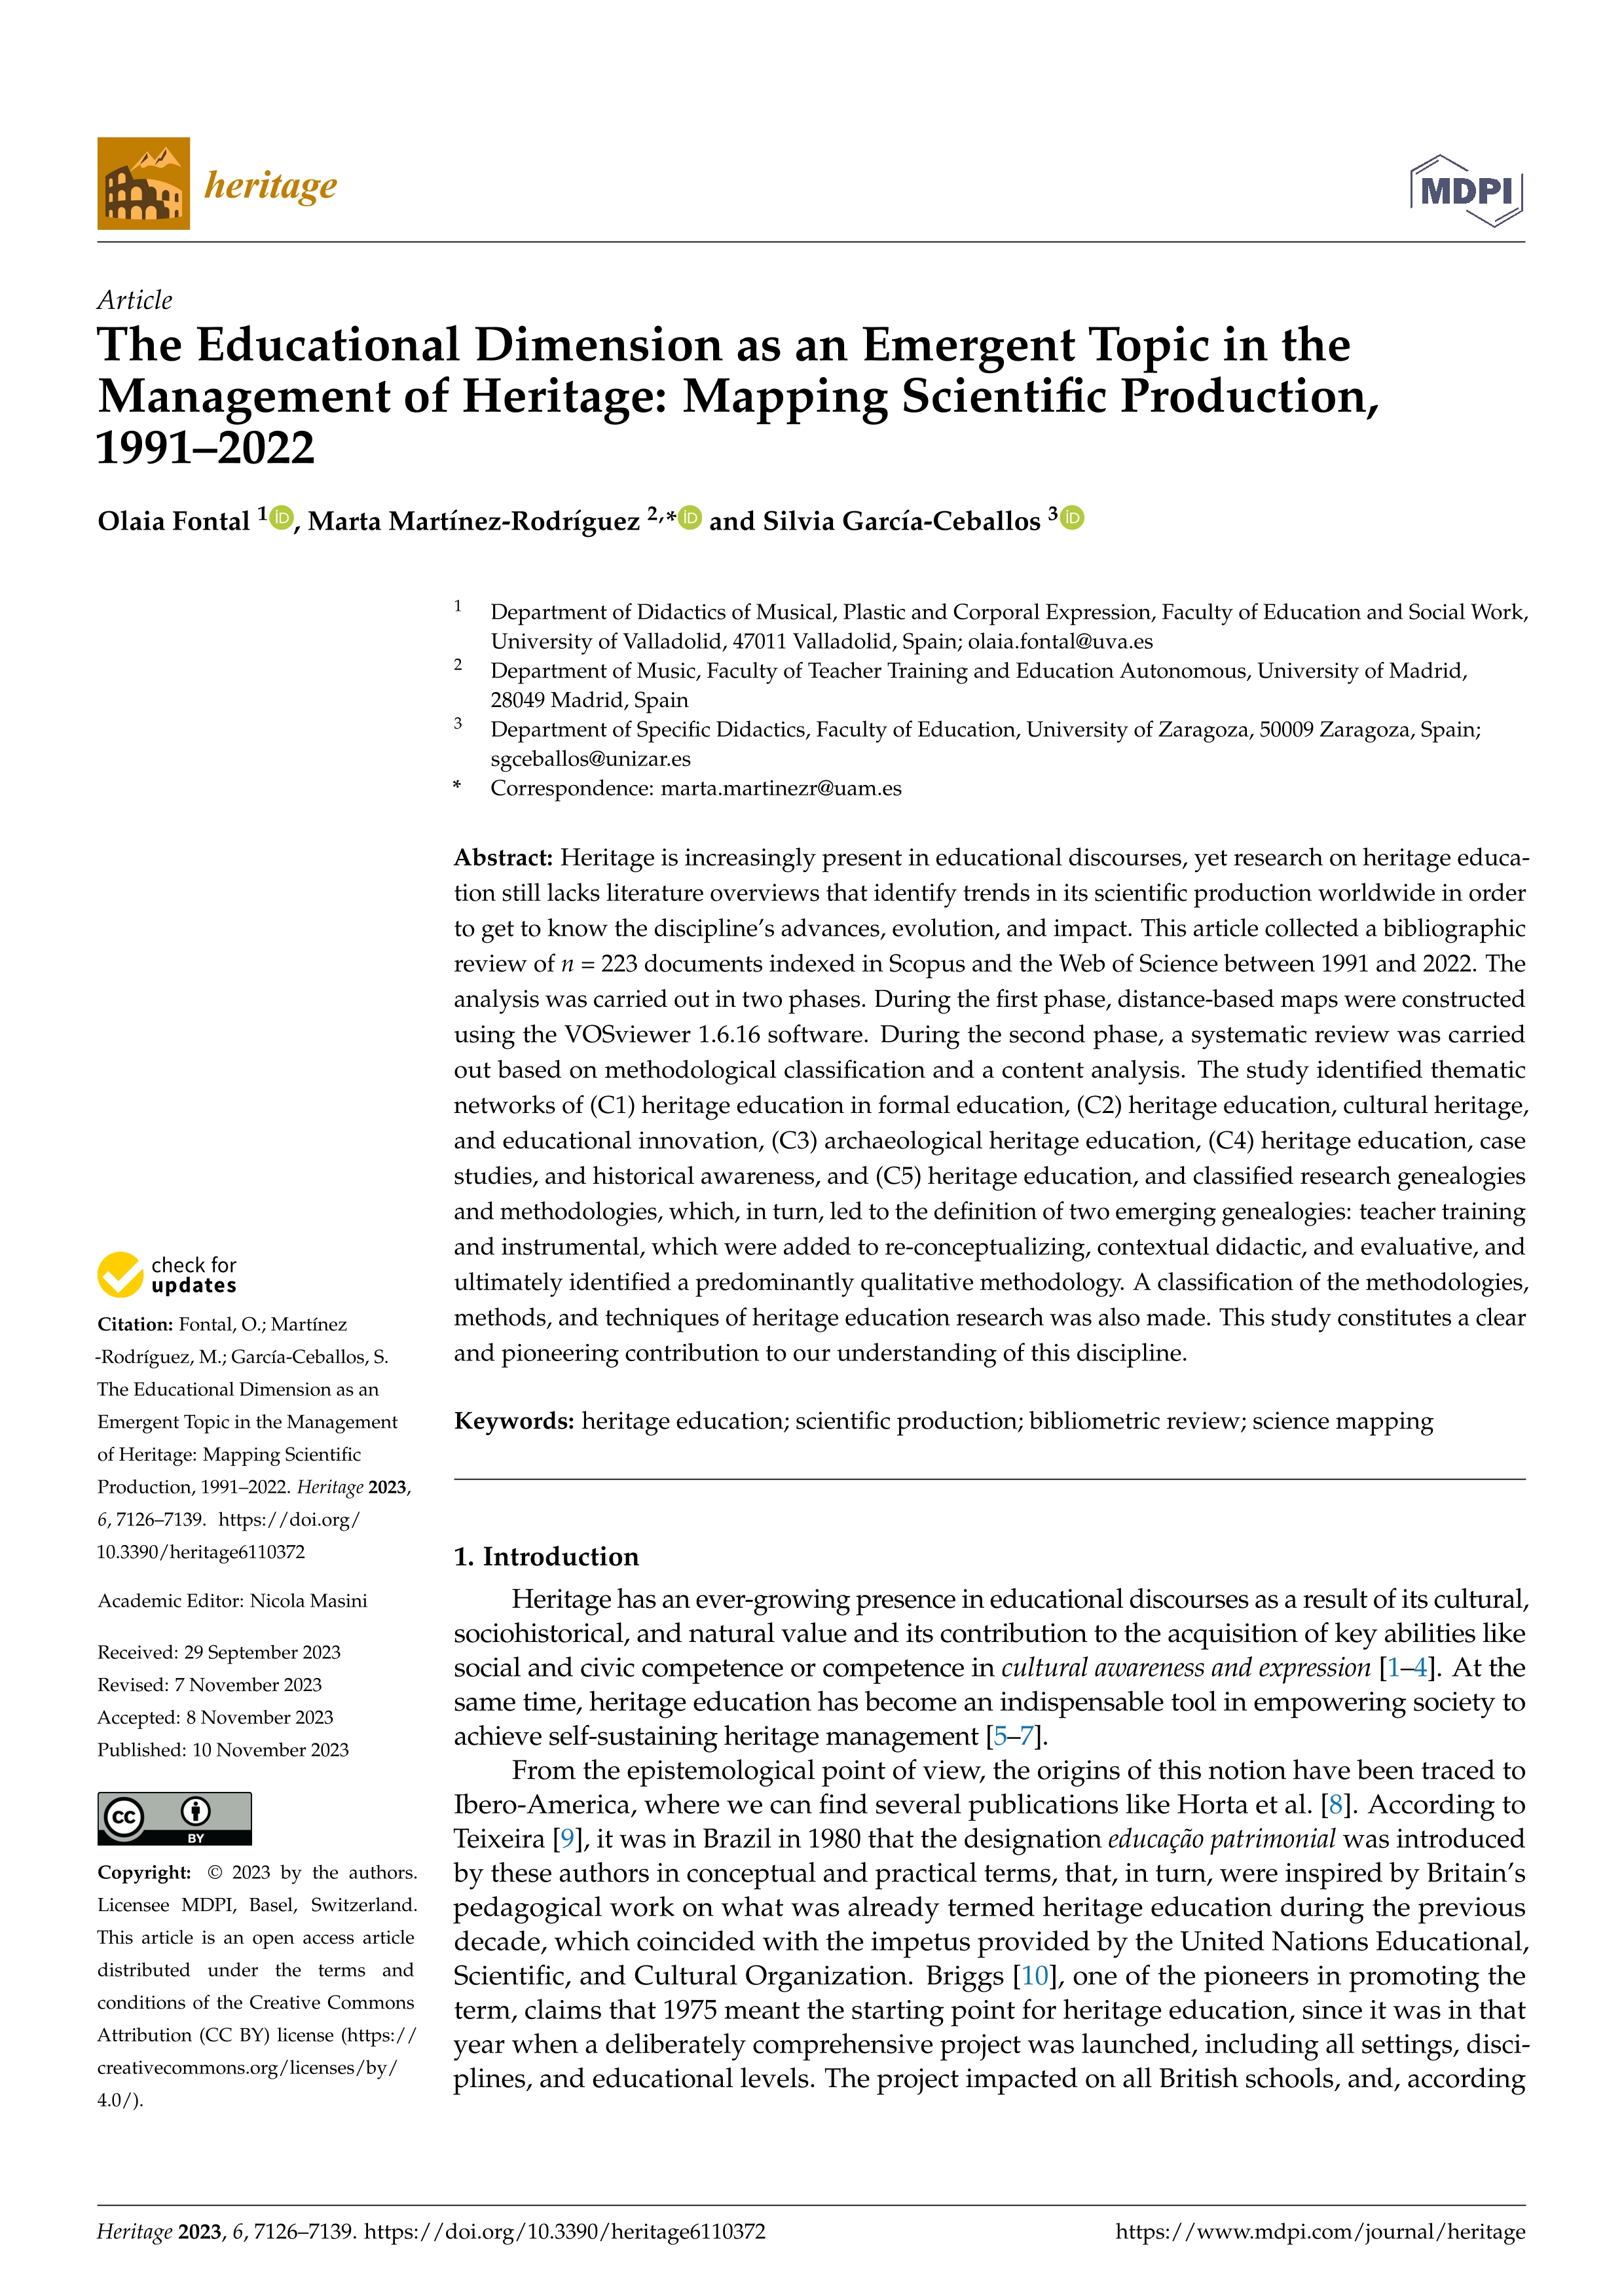 The Educational Dimension as an Emergent Topic in the Management of Heritage: Mapping Scientific Production, 1991–2022